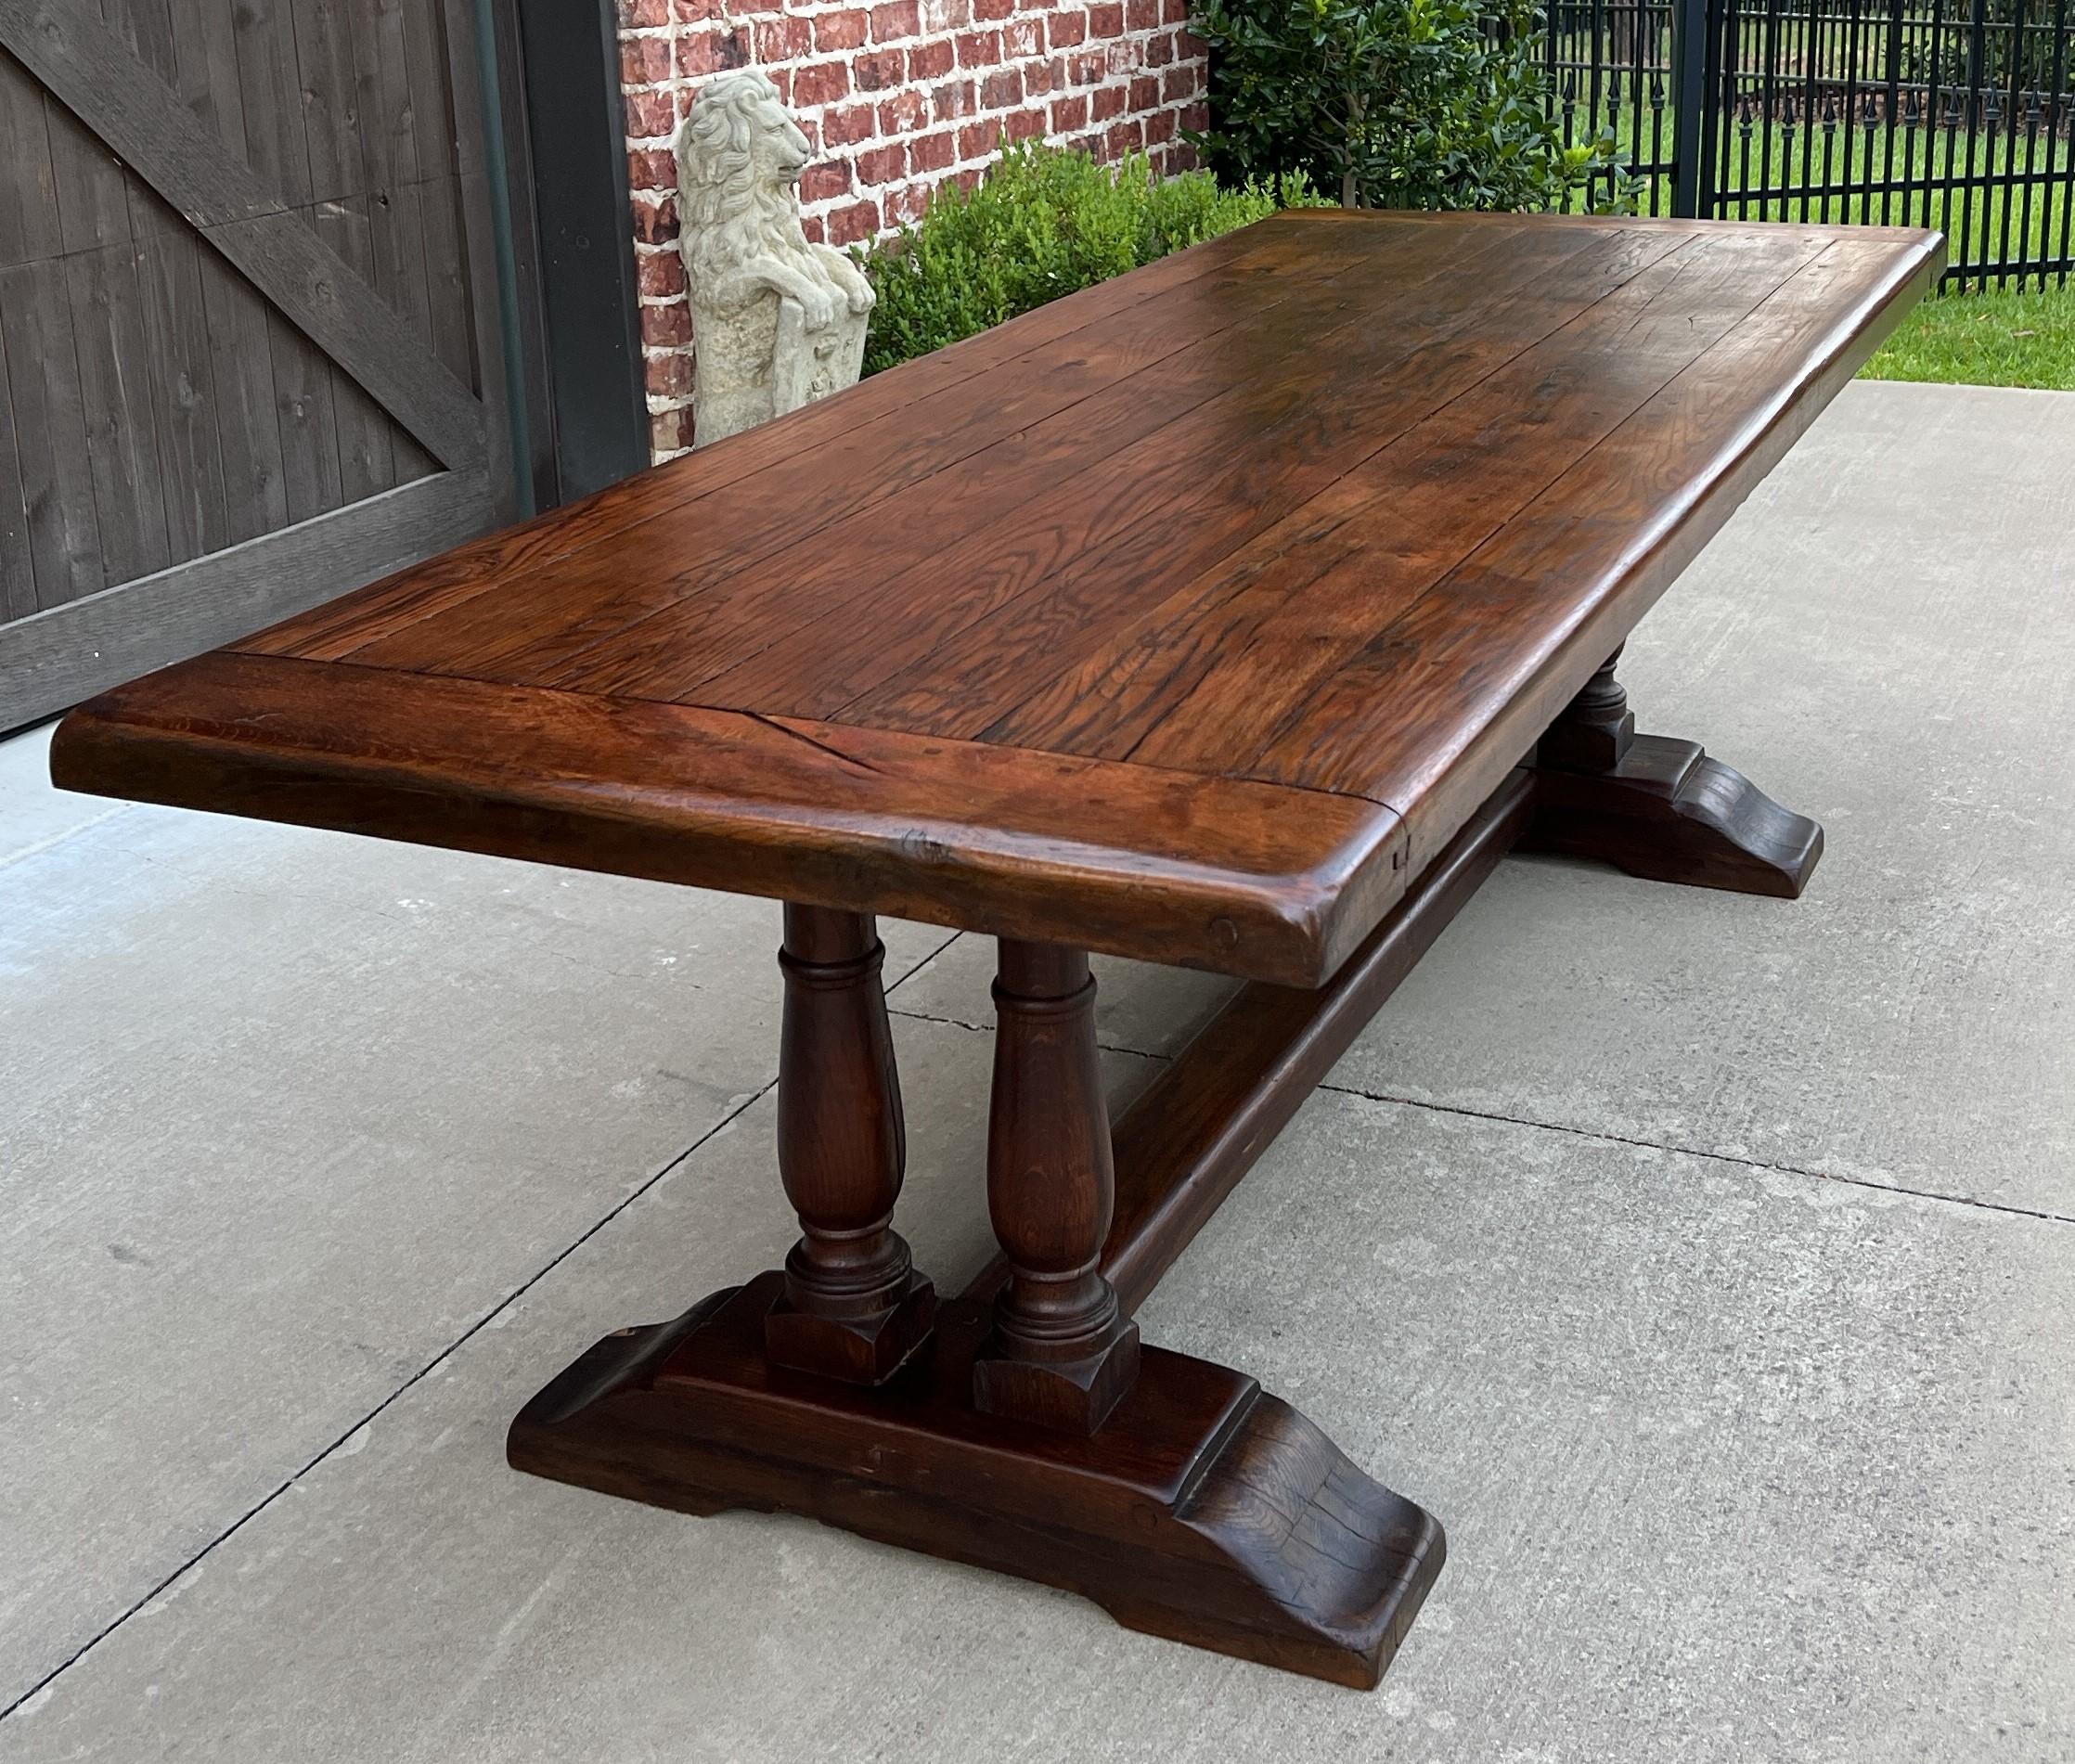 French Provincial Antique French Farm Table Dining Library Table Desk Farmhouse Oak 94